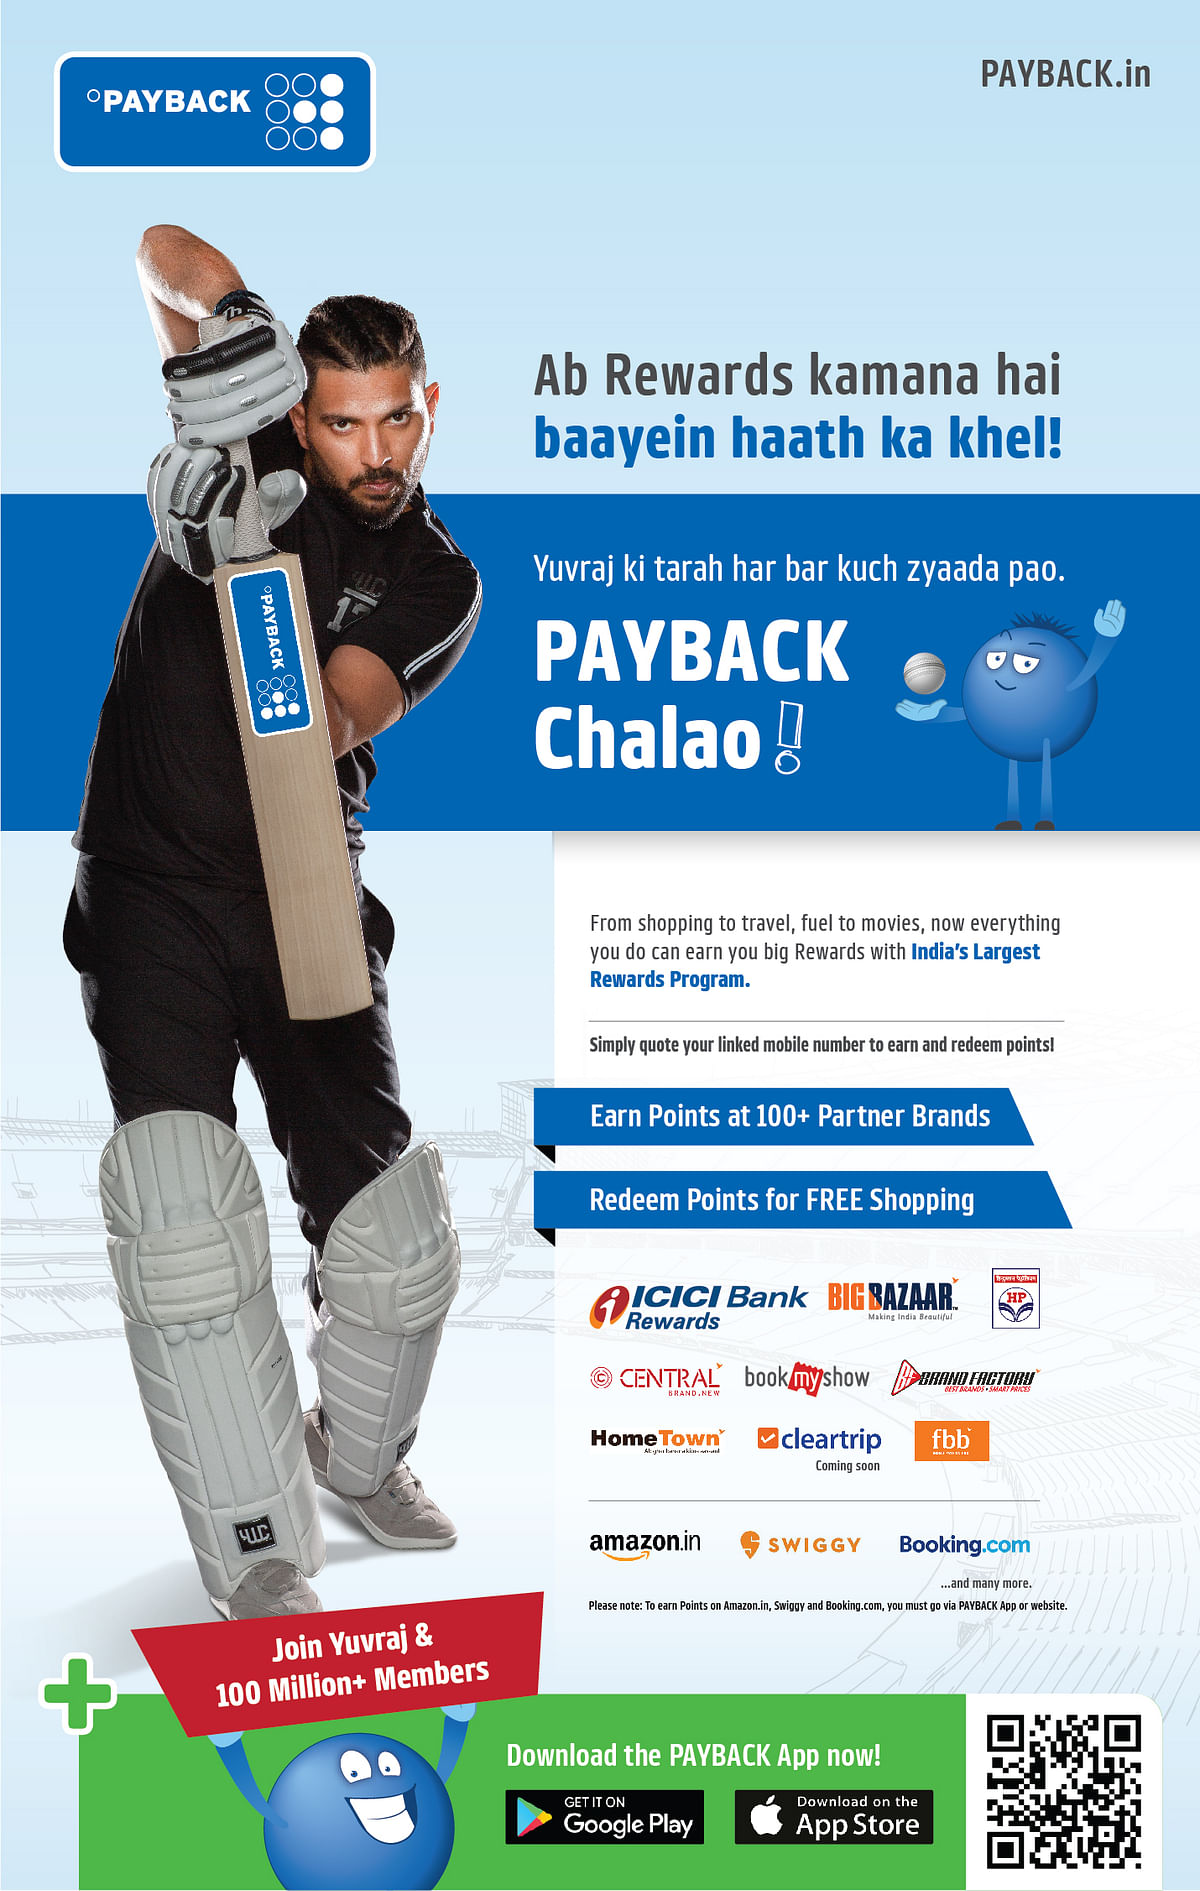 PAYBACK joins hands with Cricketer, Yuvraj Singh to launch its new campaign ‘PAYBACK Chalao’